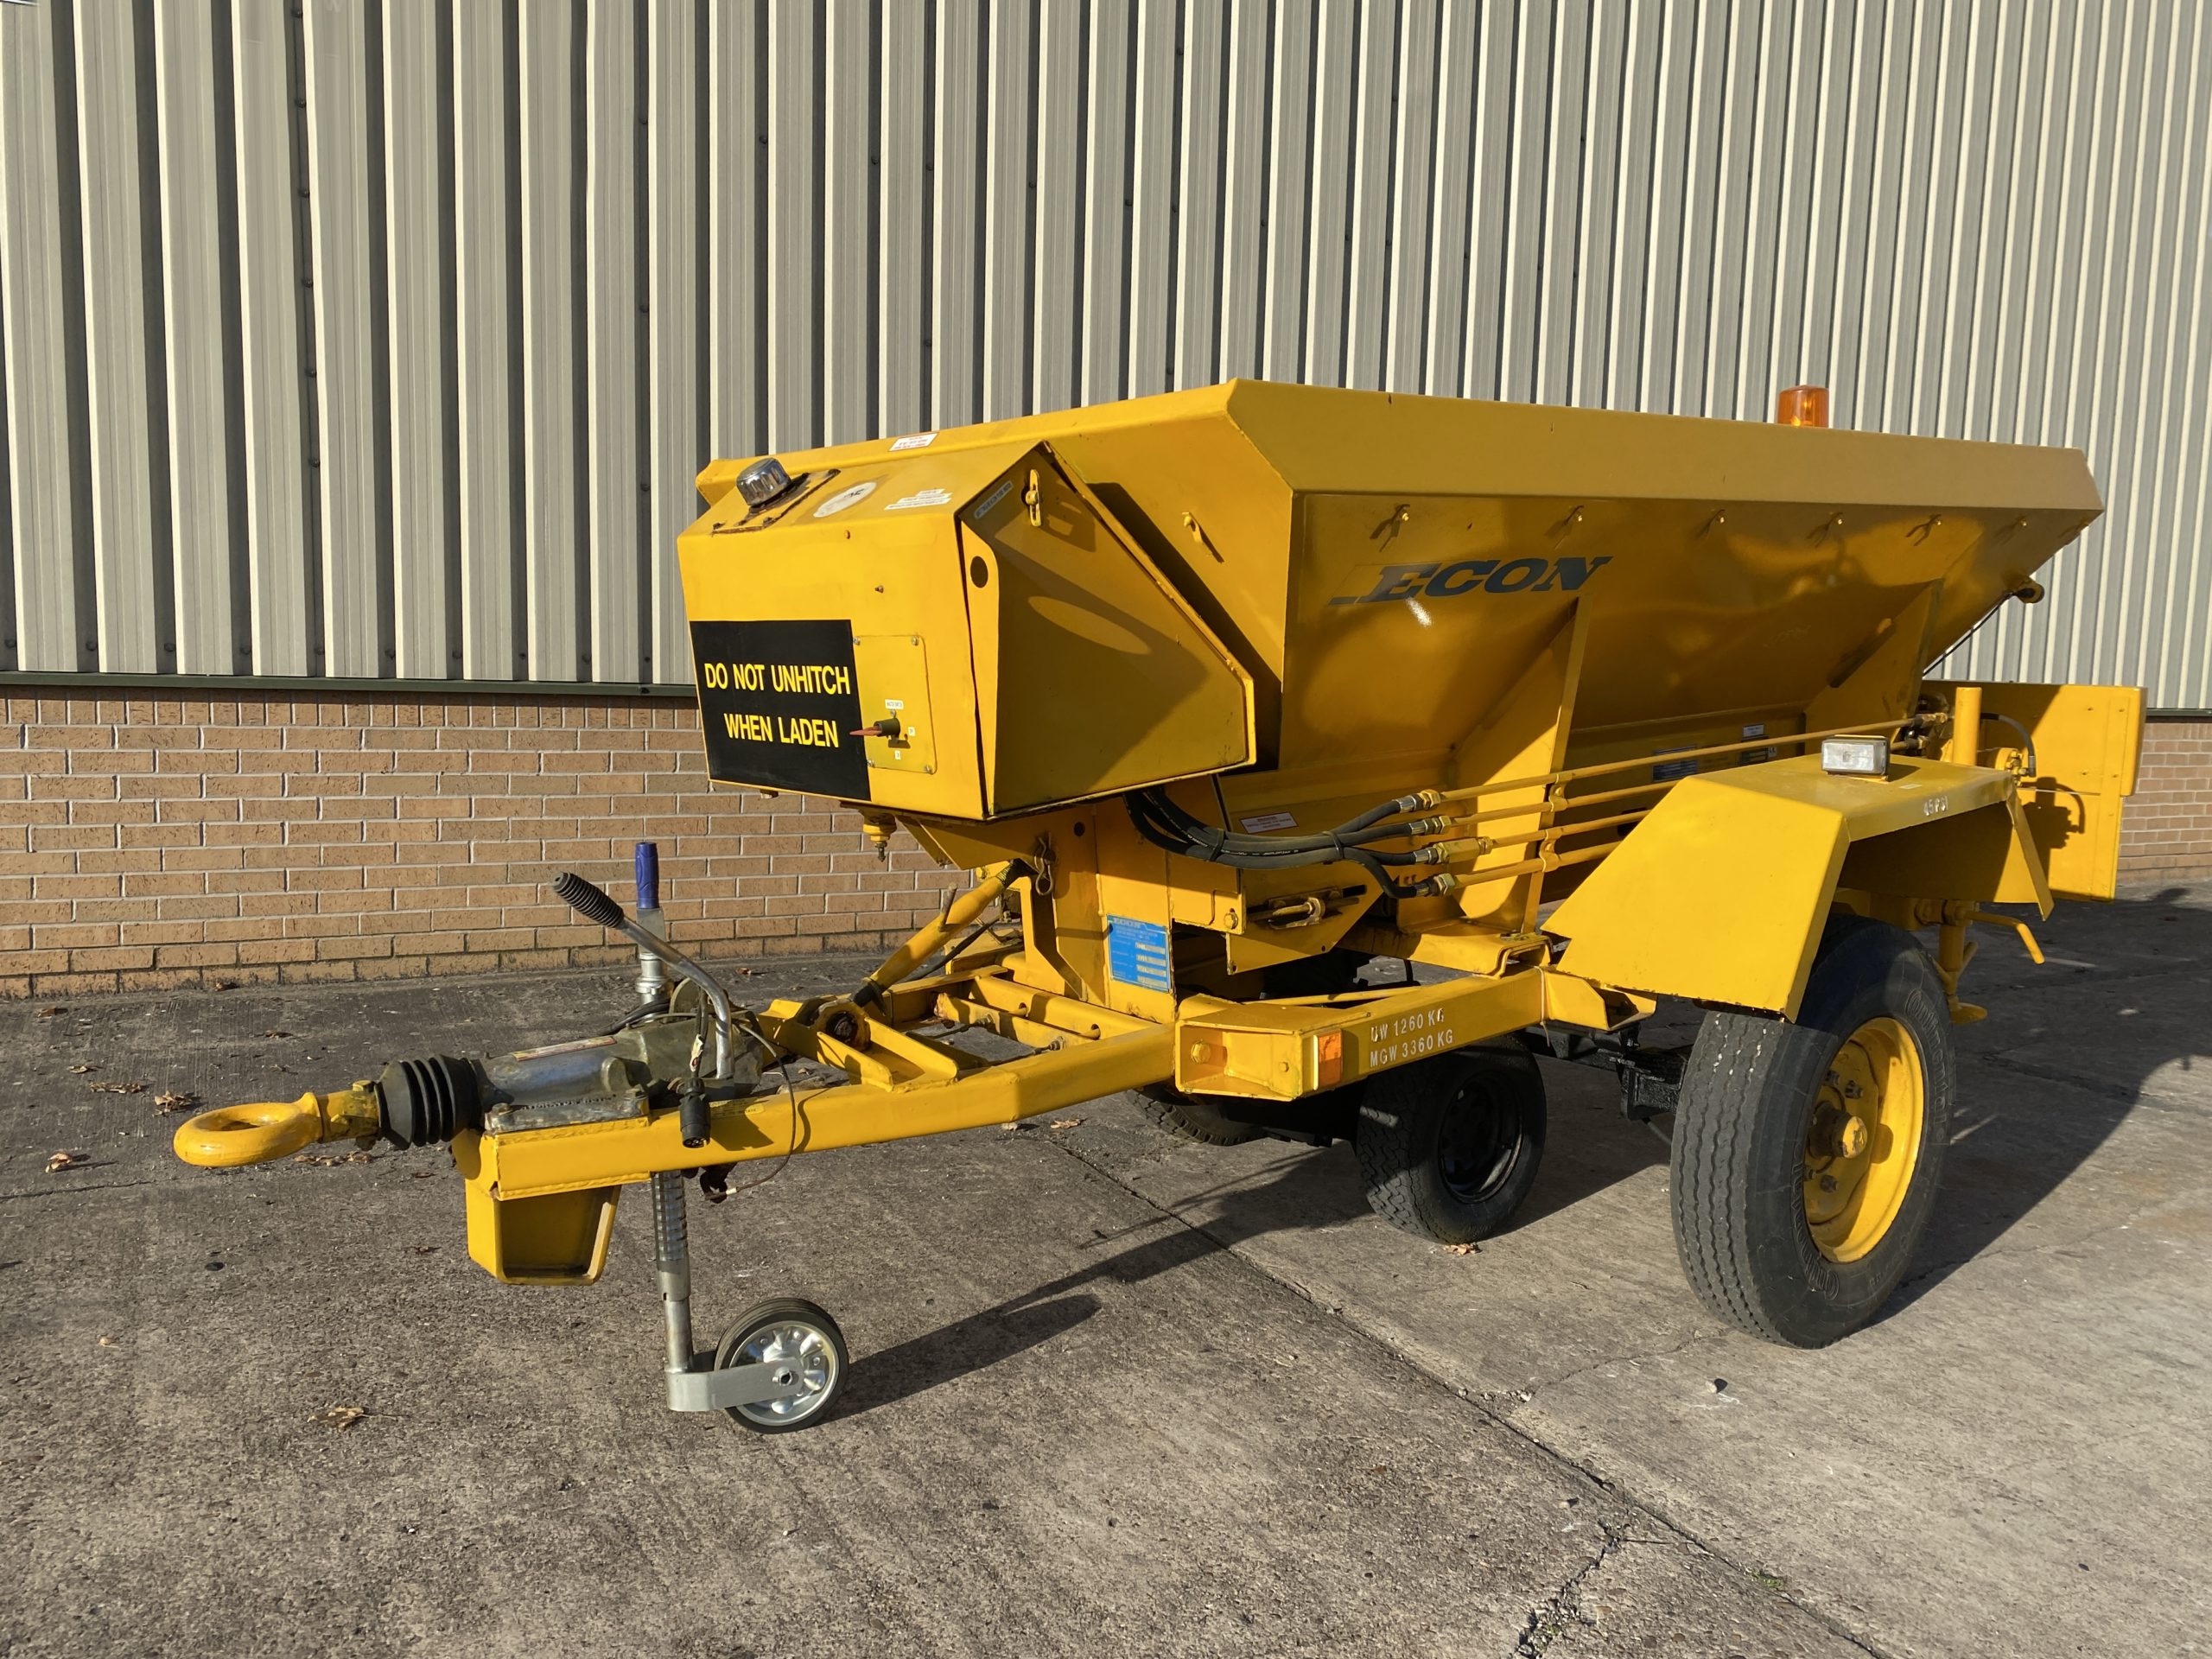 Econ towed gritter trailer - Govsales of ex military vehicles for sale, mod surplus